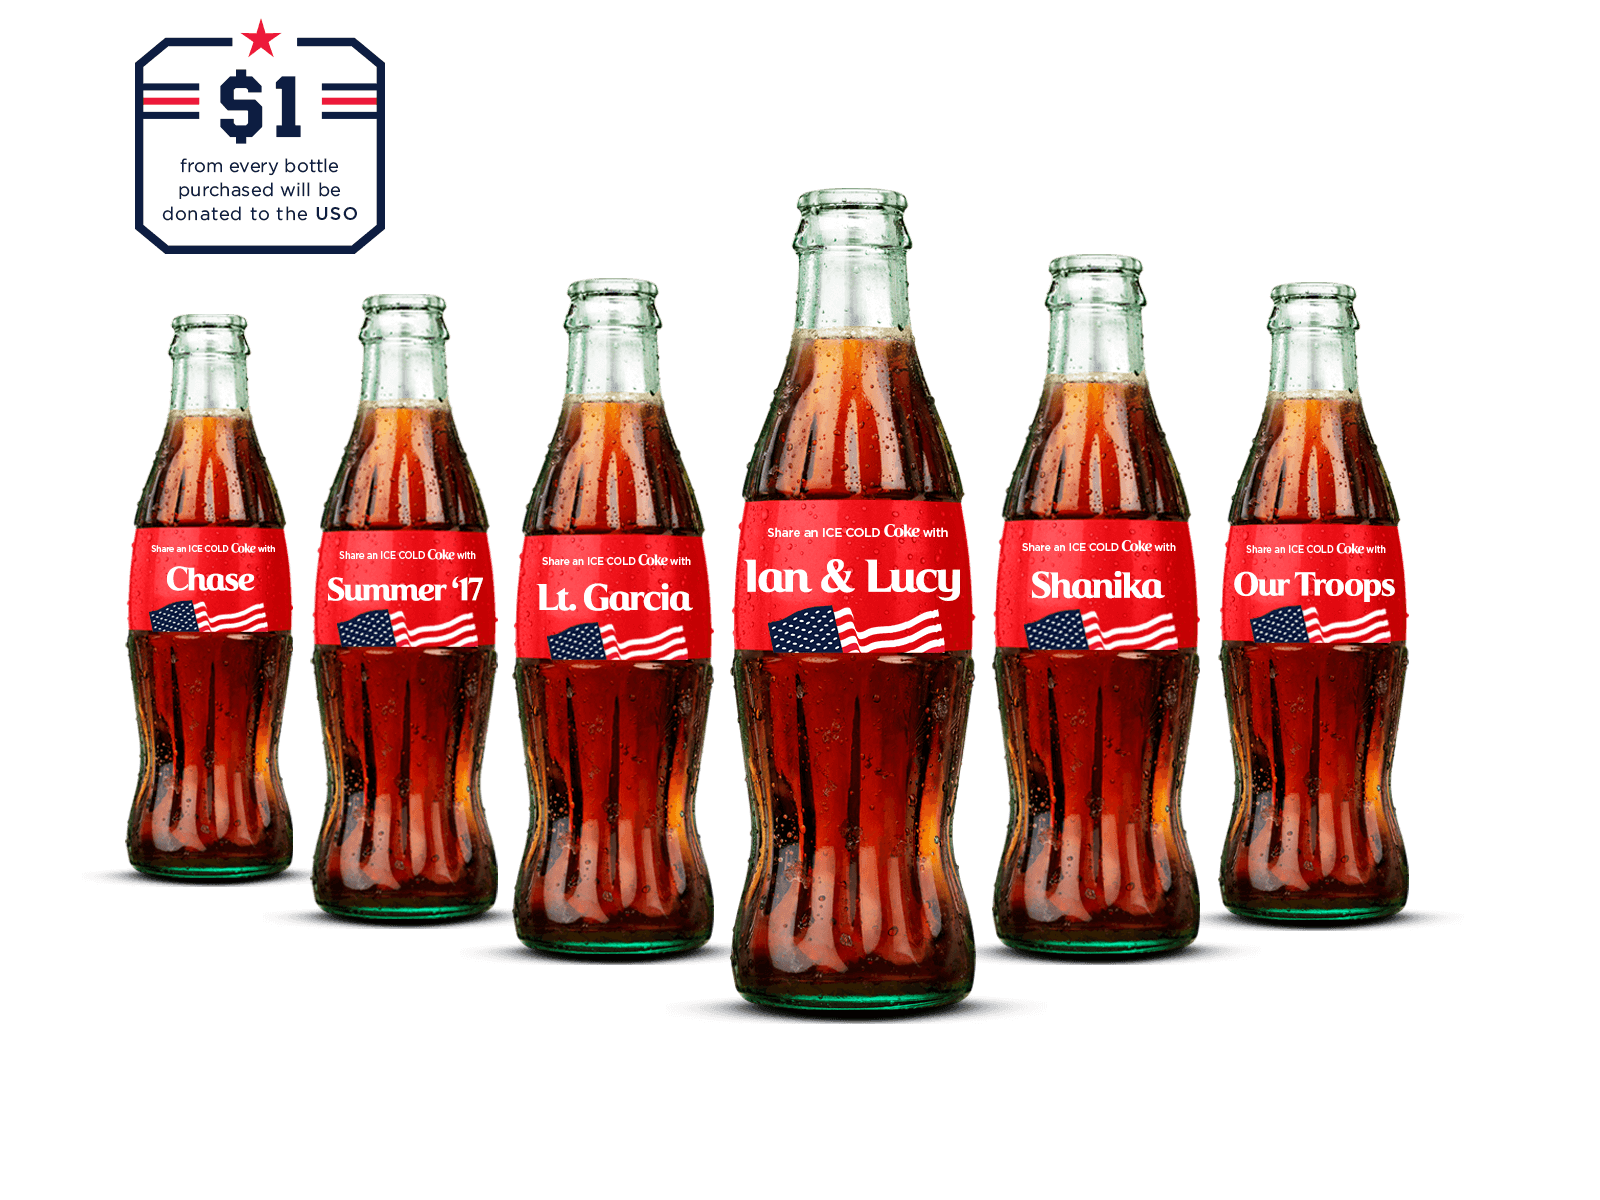 USO Personalized Coke Bottles Or Cans. Share A Coke Cola